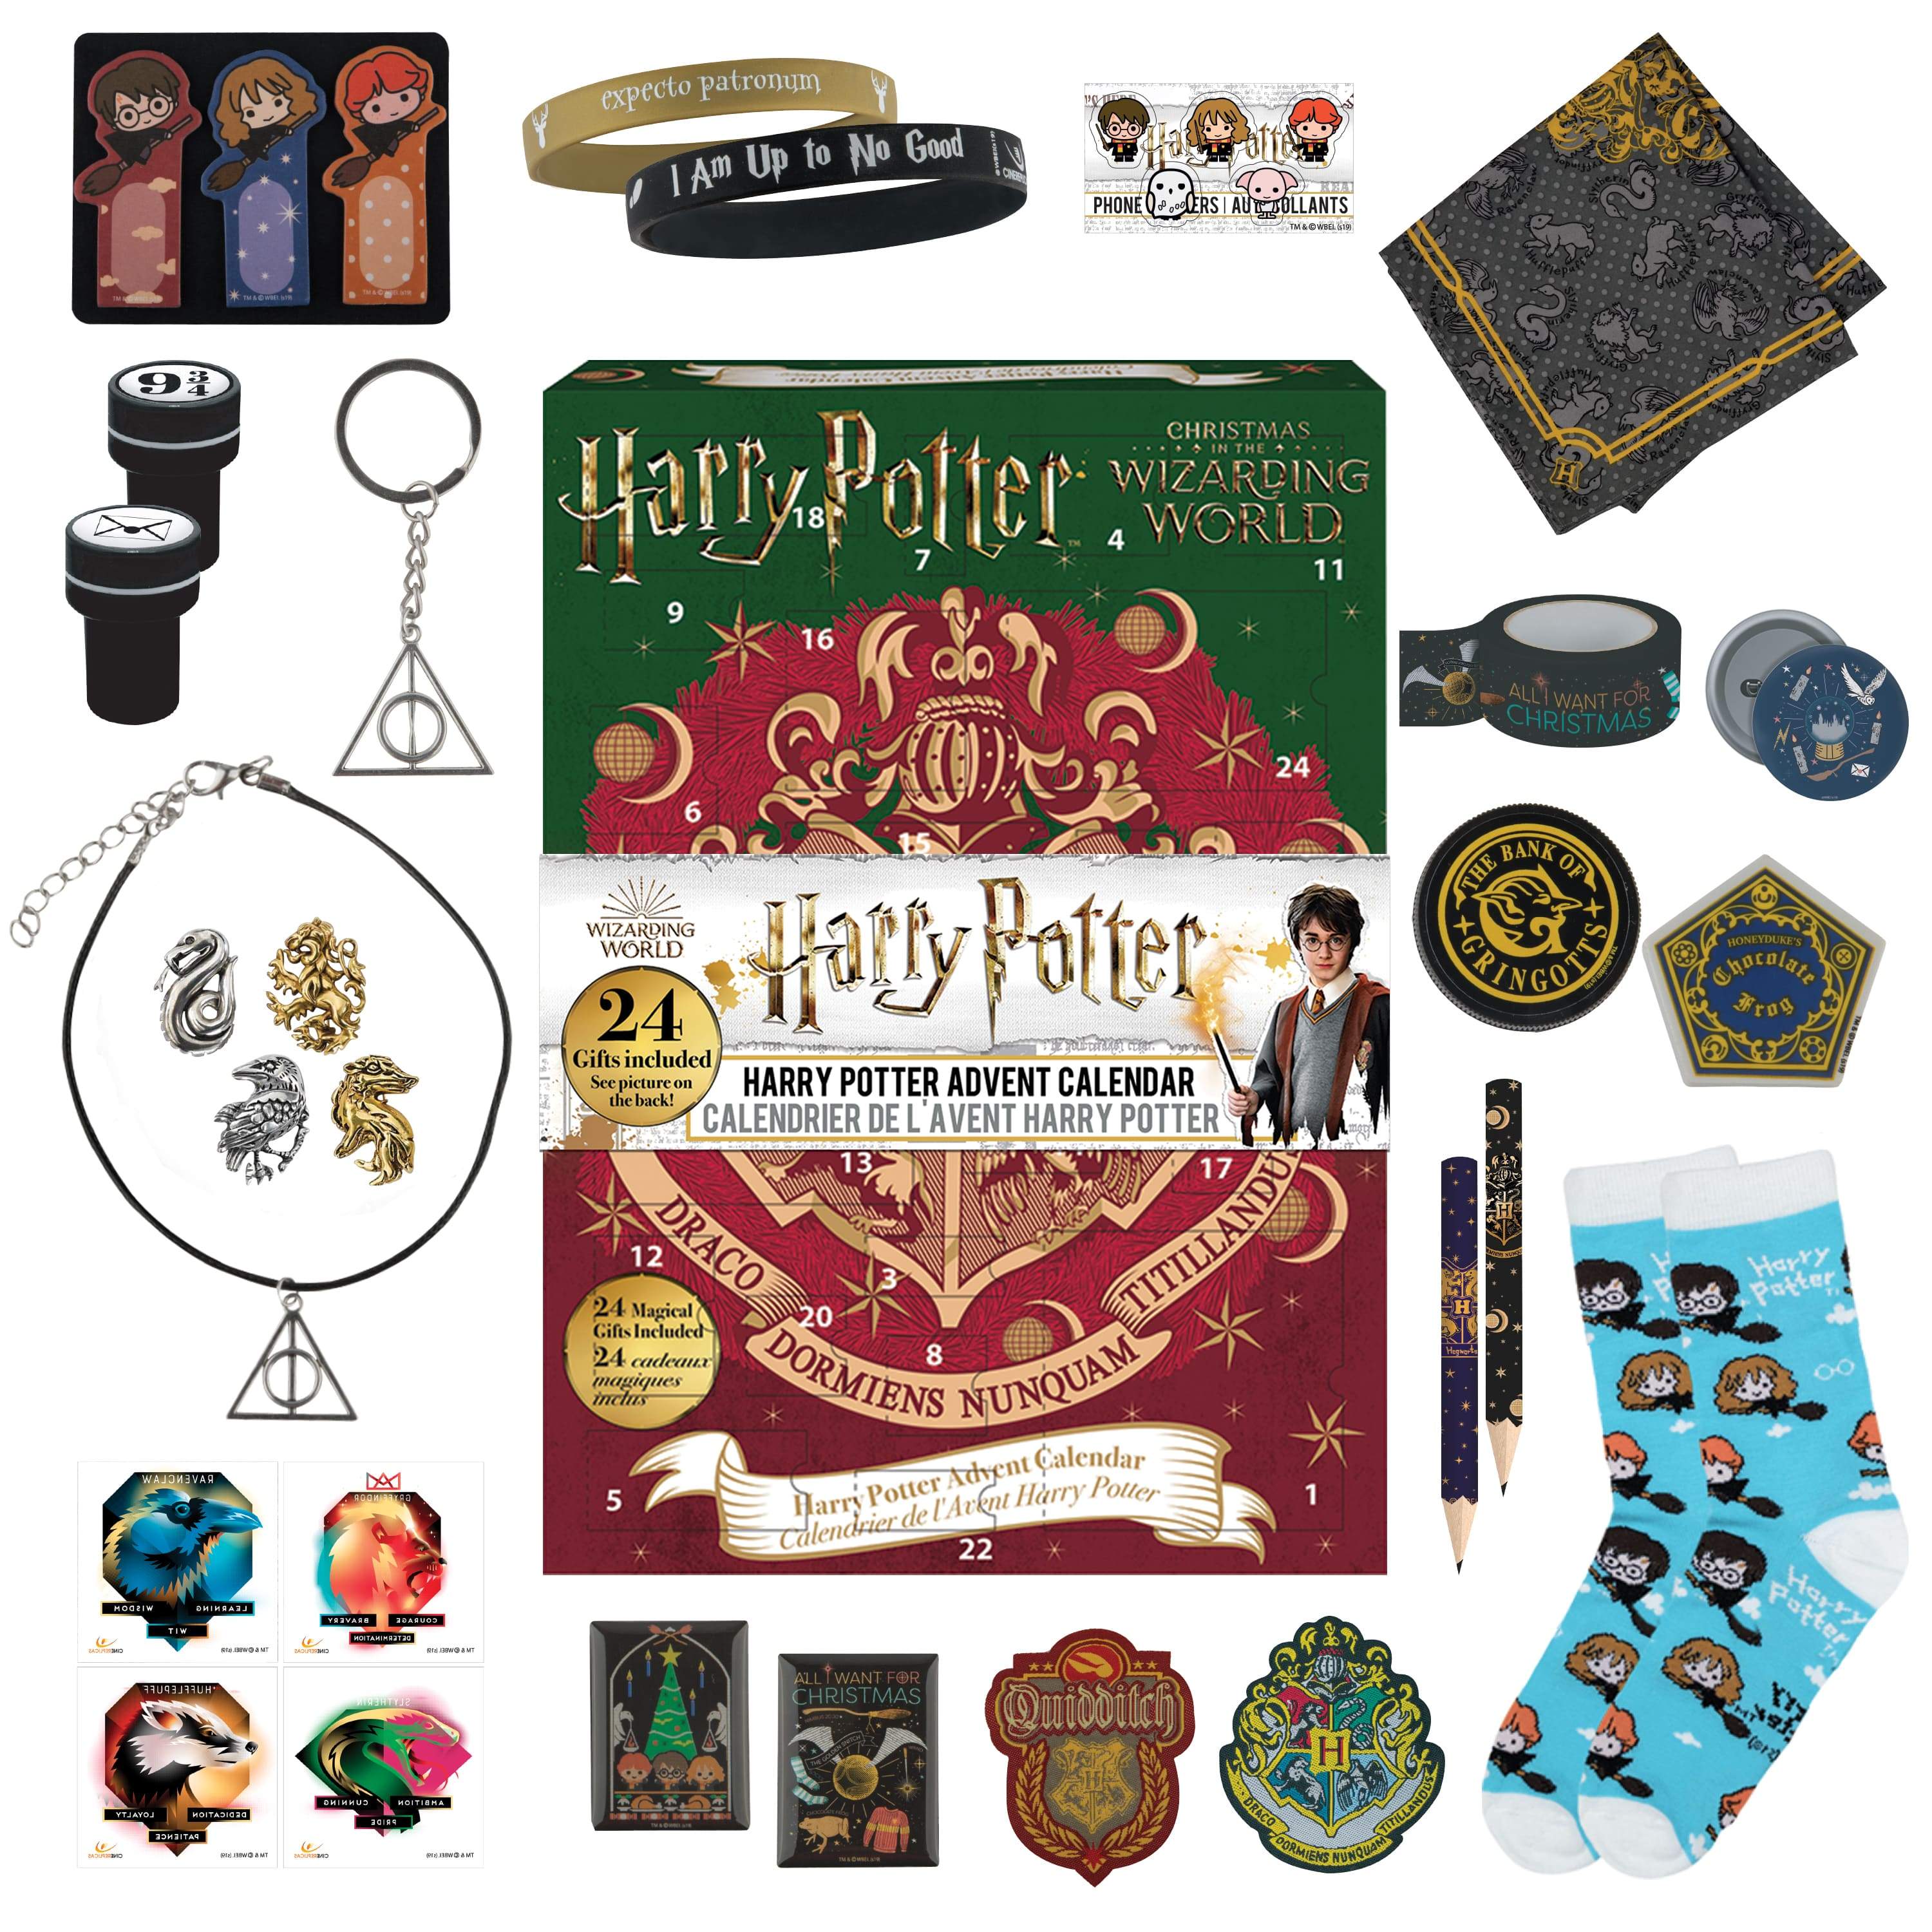 New Harry Potter Advents Are Ready For Pre Order Cue The Magic